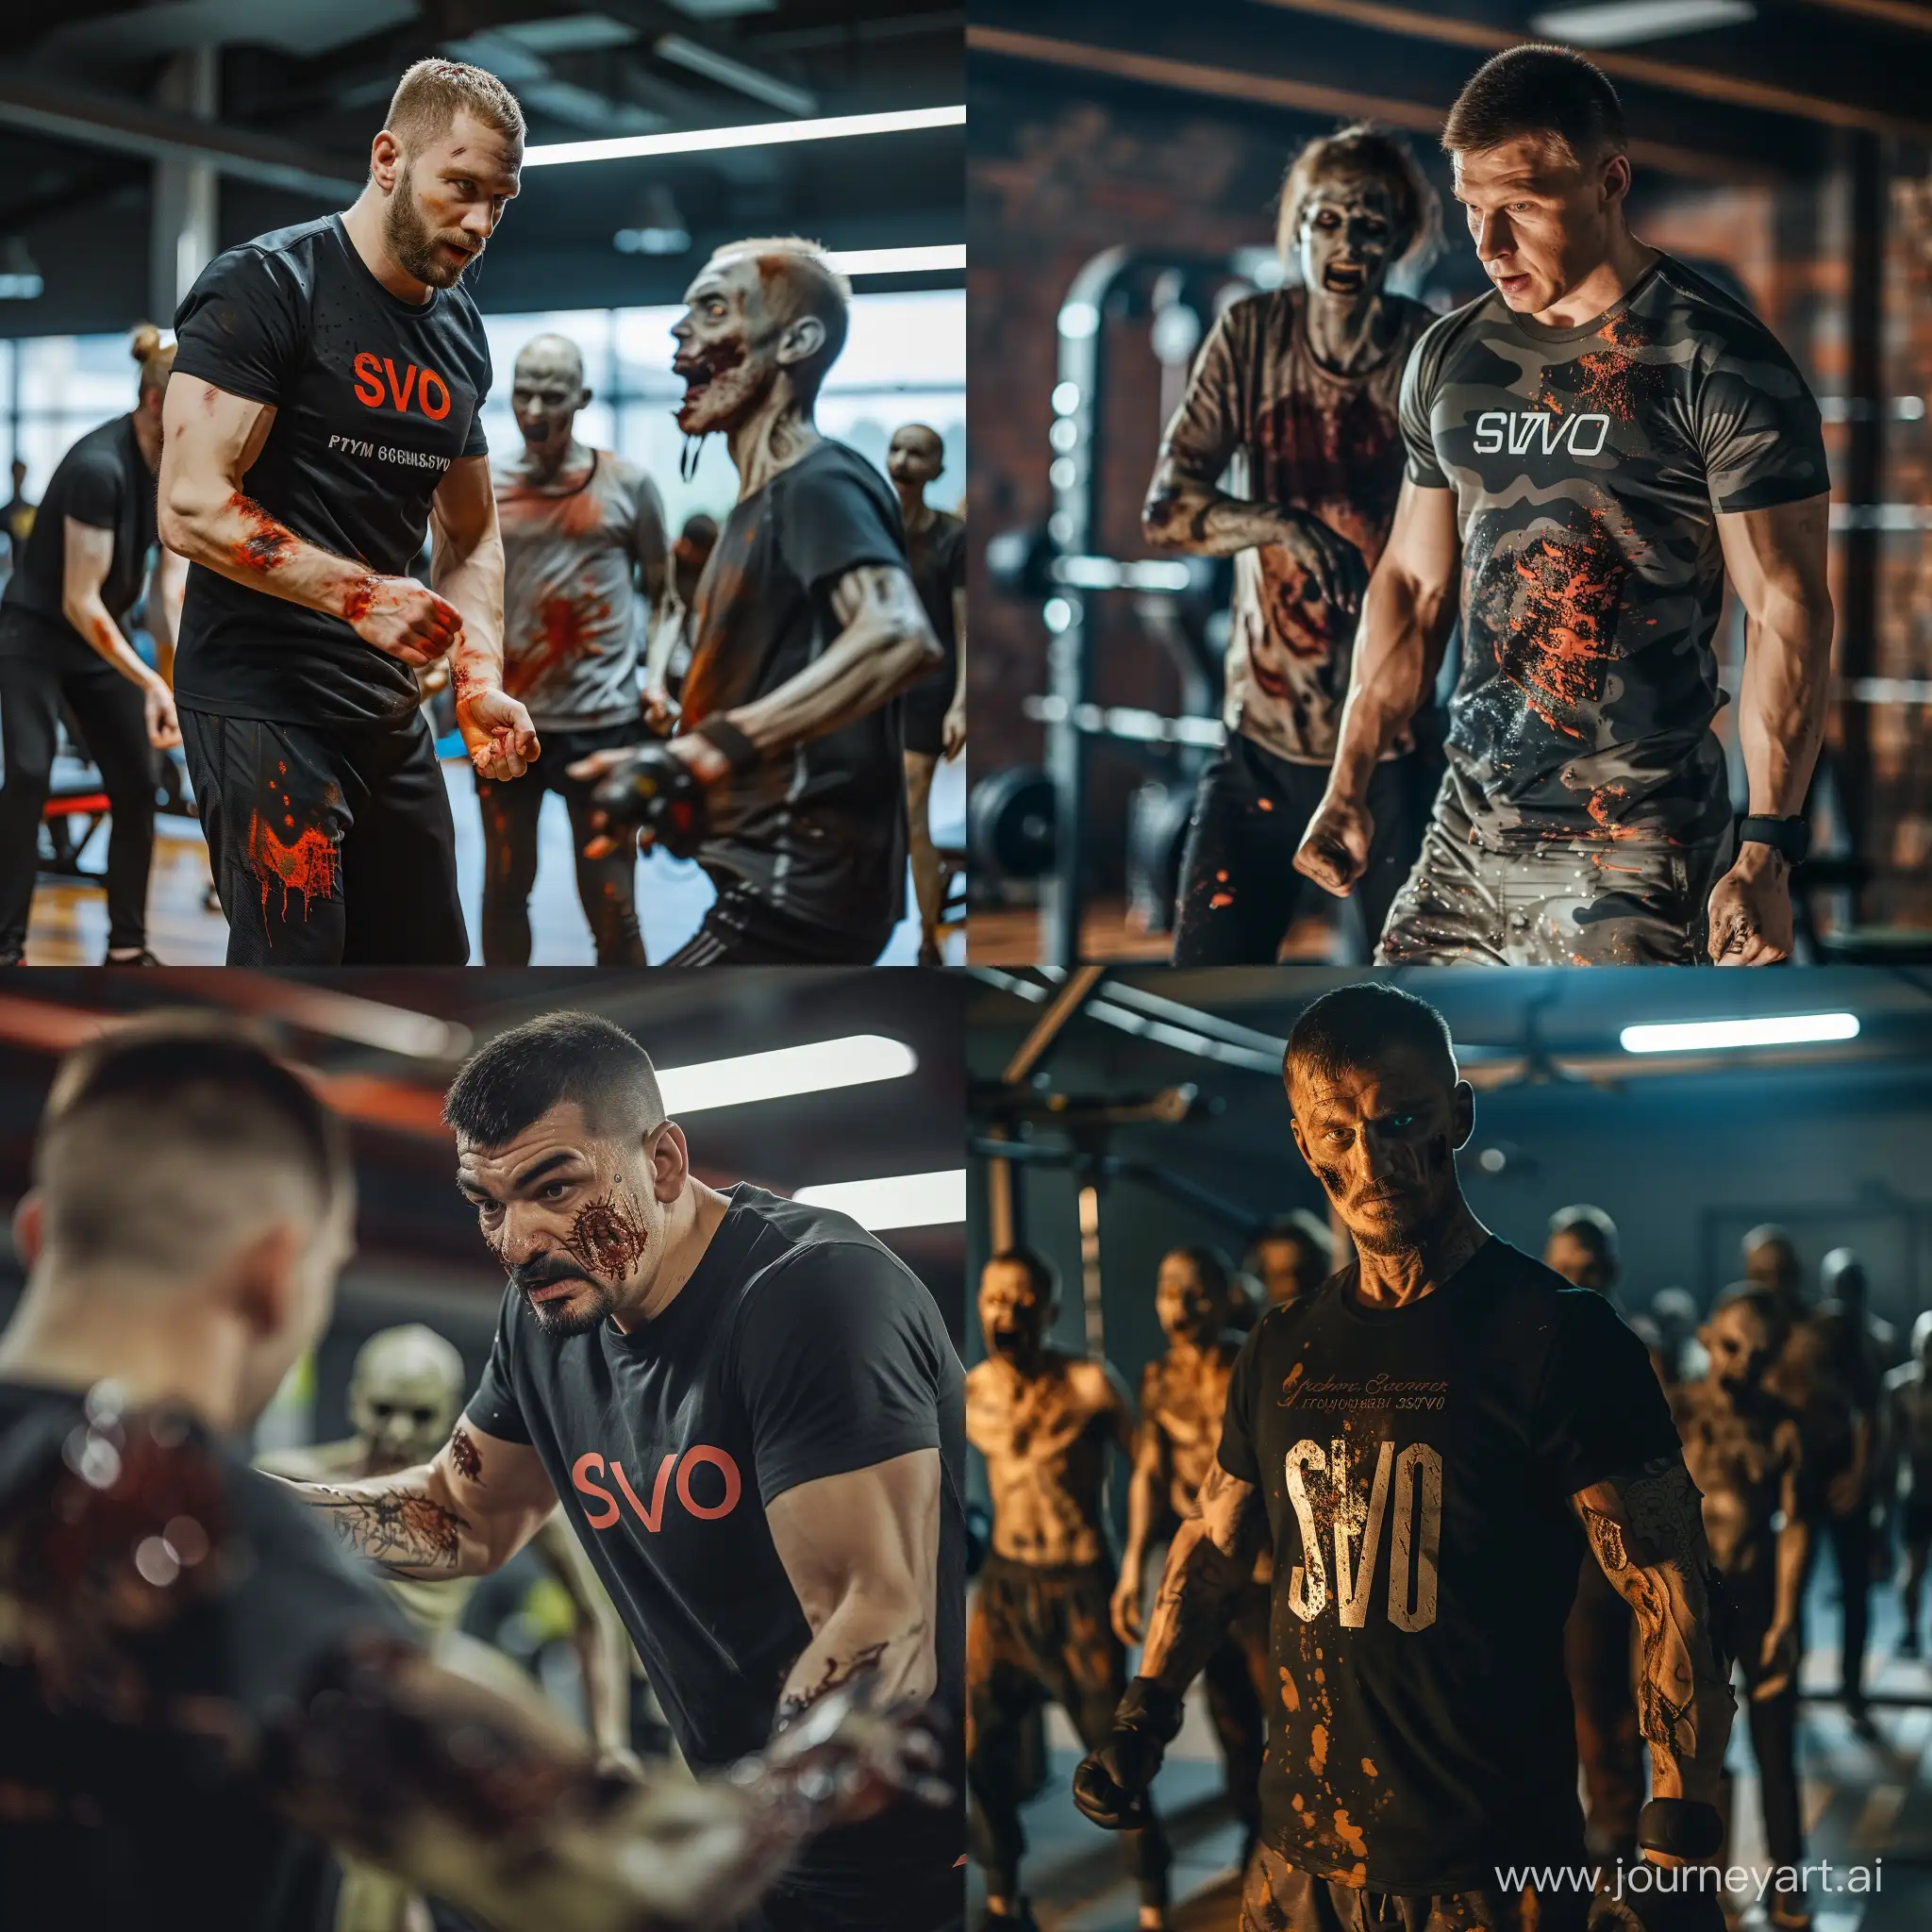 Zombie-Fitness-Training-Coach-Leads-SVO-TShirt-Clad-Undead-in-Gym-Workout